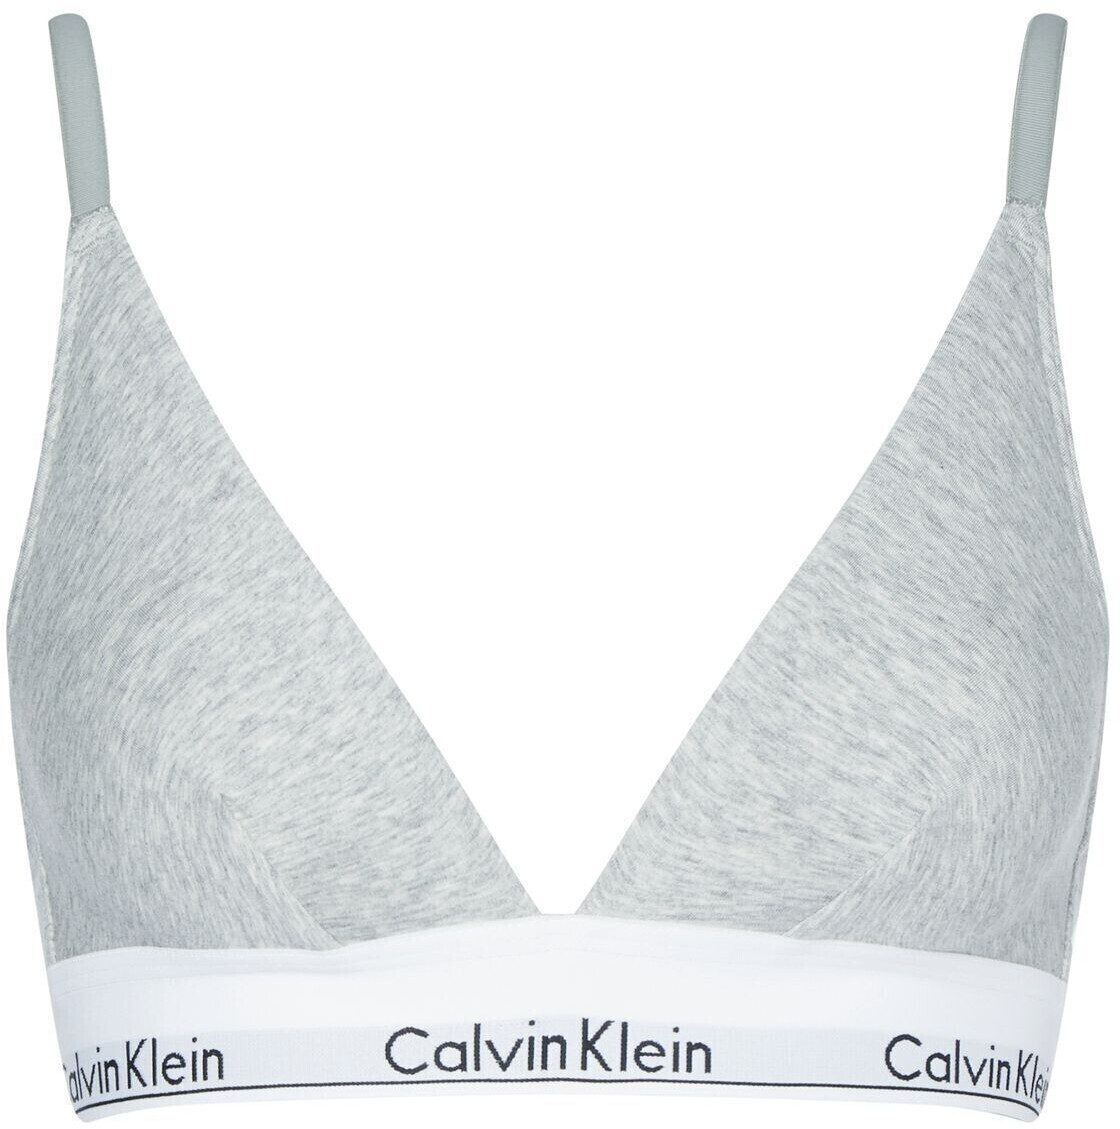 Buy Calvin Klein Triangle Bra Modern Cotton Unlined grey from £24.90  (Today) – Best Deals on